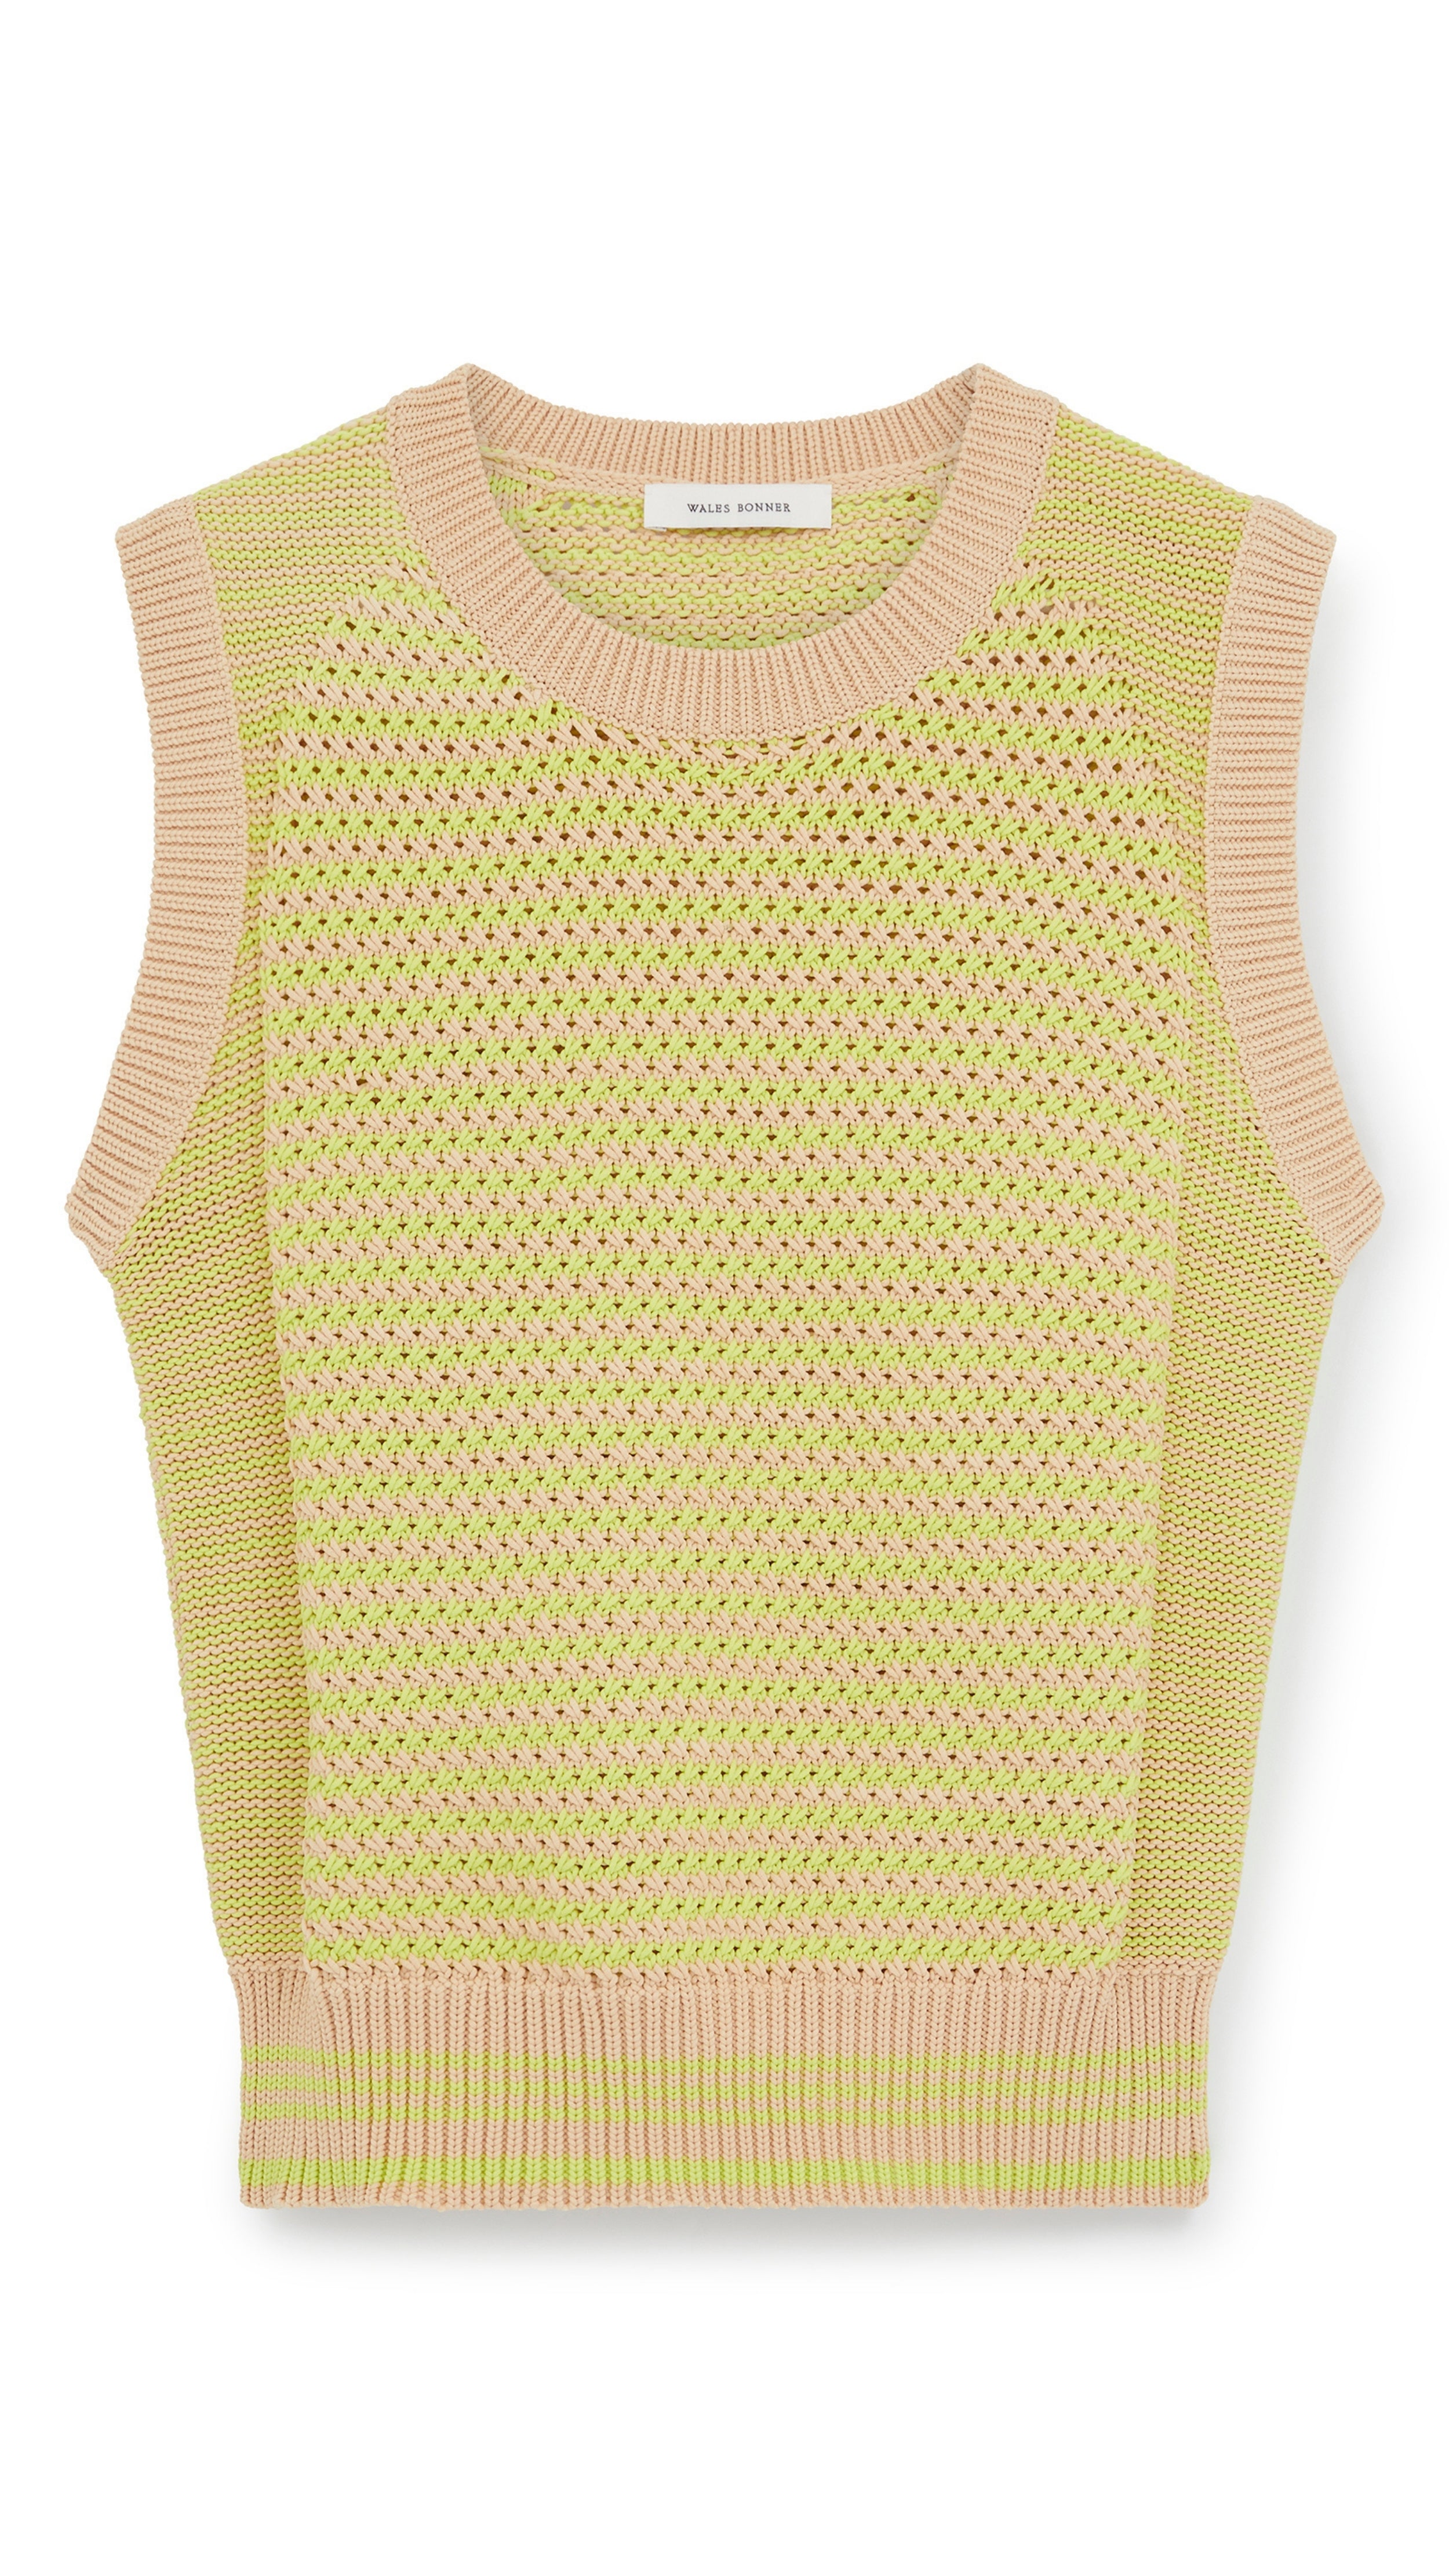 Wales Bonner Unity Sweater Vest Woven from recycled polyester, the vest is lime green and beige with pops of pale pink. This top has ribbed knit at the waist and arms. Product photo shown from front.